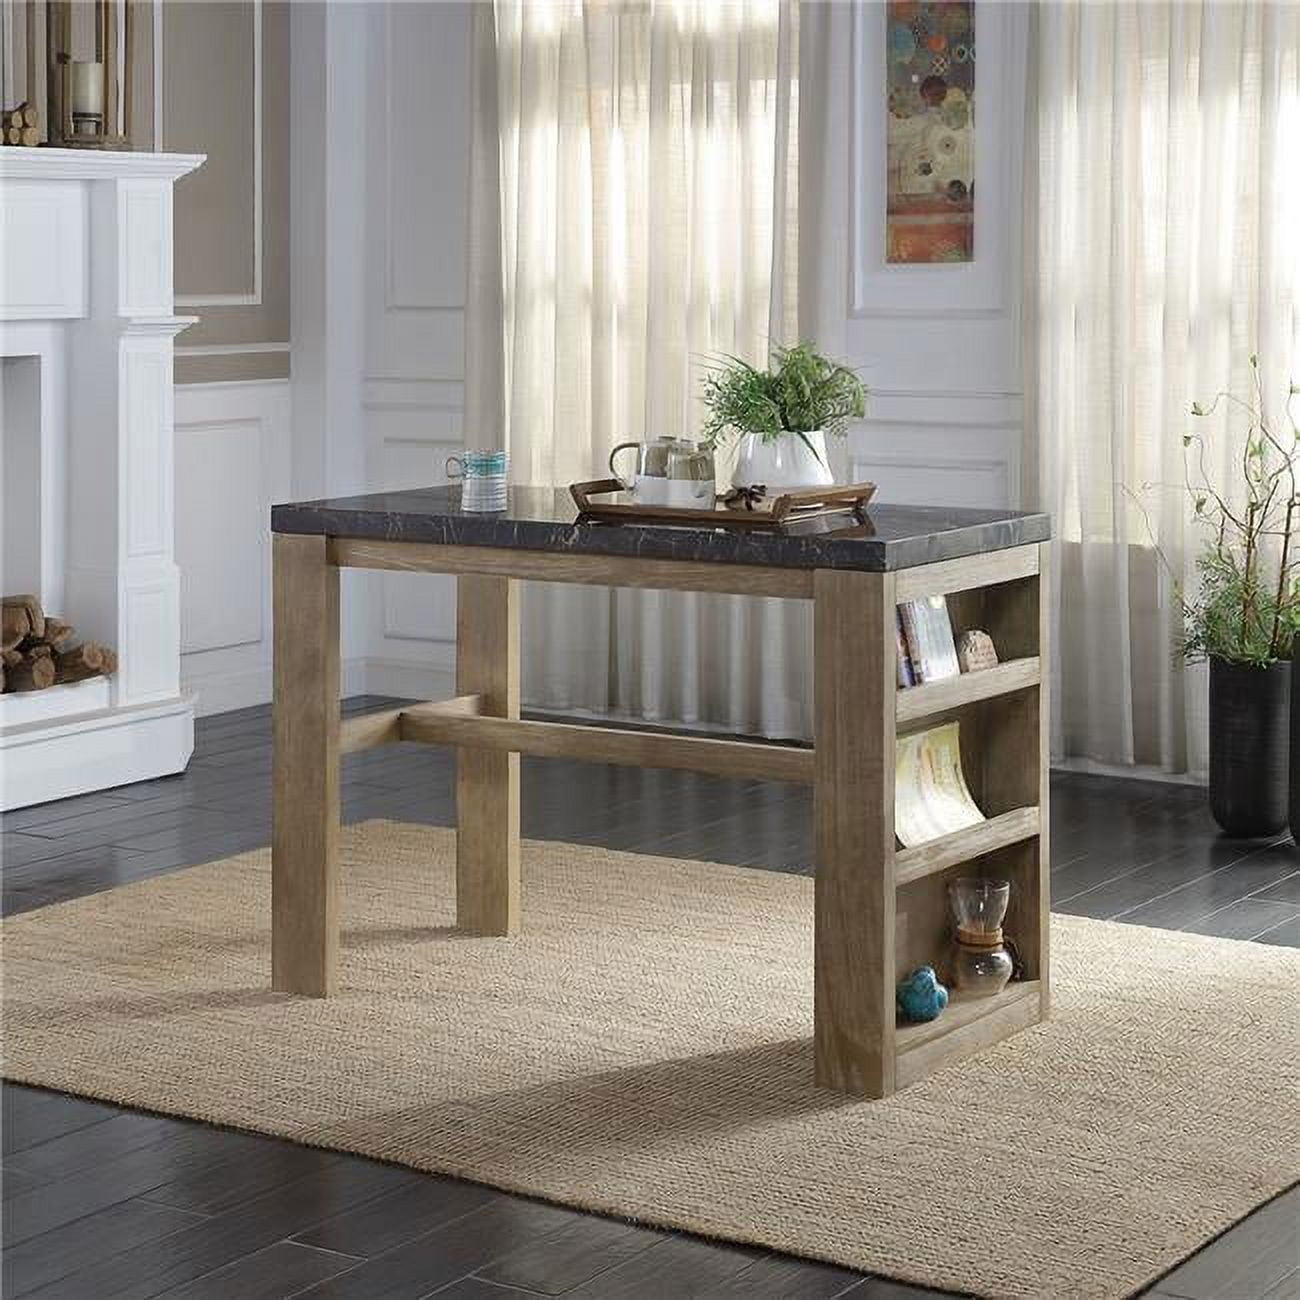 Picture of Direct Wicker UBS-DN00551 Marble and Oak Finish Counter Table, Industrial Style Bar Table with 3 Open Compartment